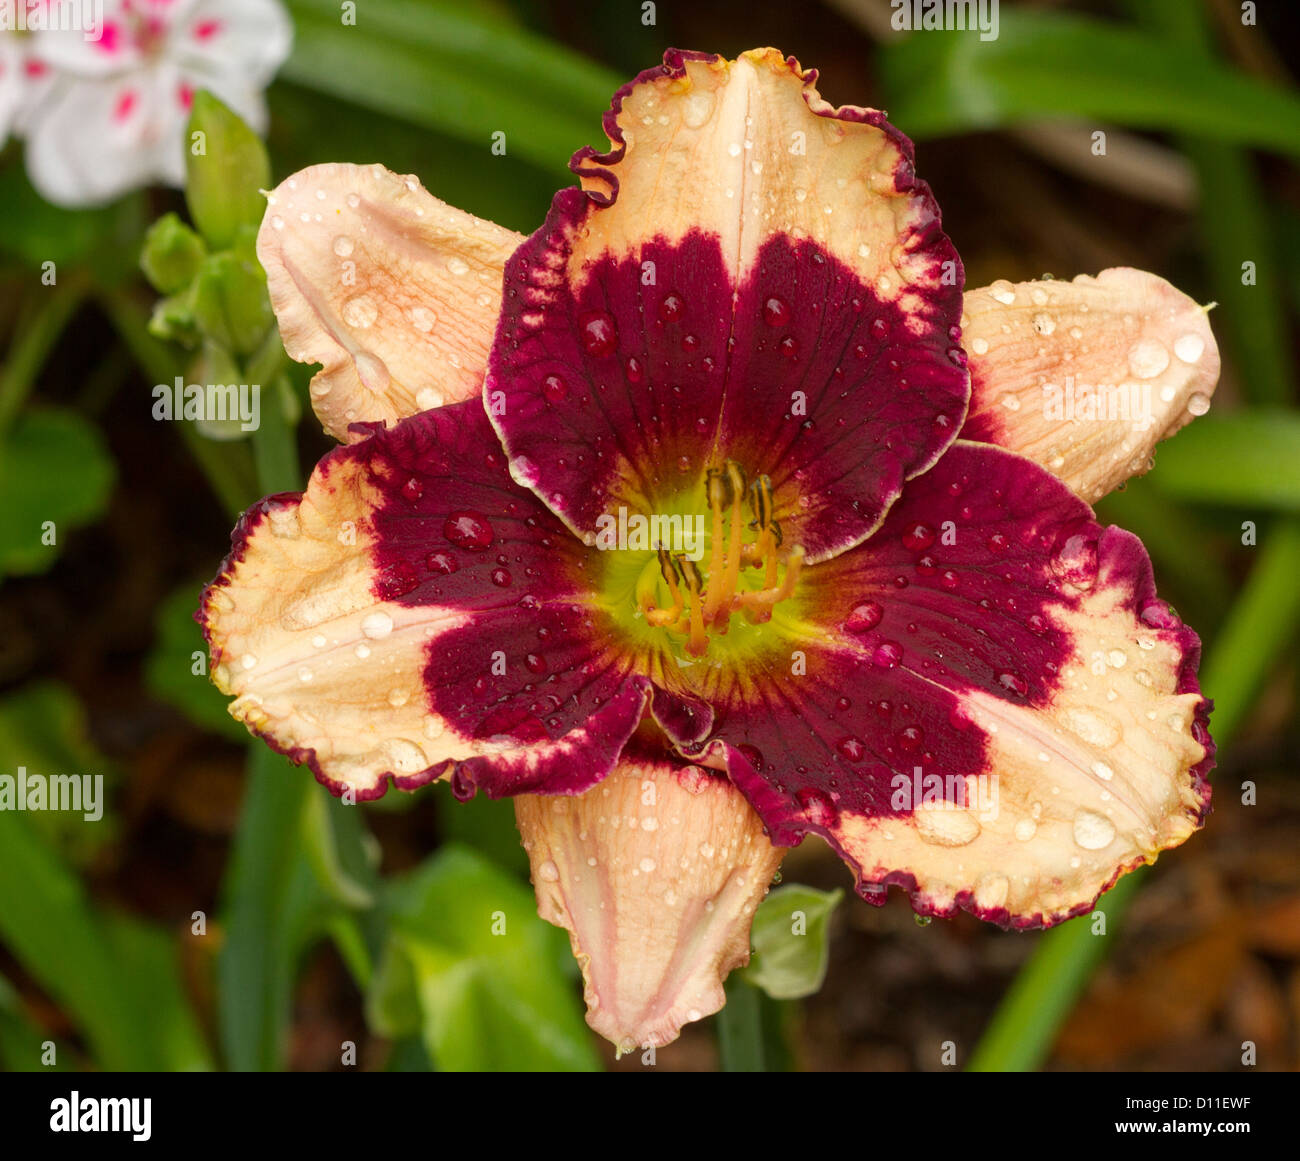 Spectacular dark red and apricot frilly edged flower of Hemerocallis 'Jane Trimmer' with raindrops on petals and emerald foliage Stock Photo